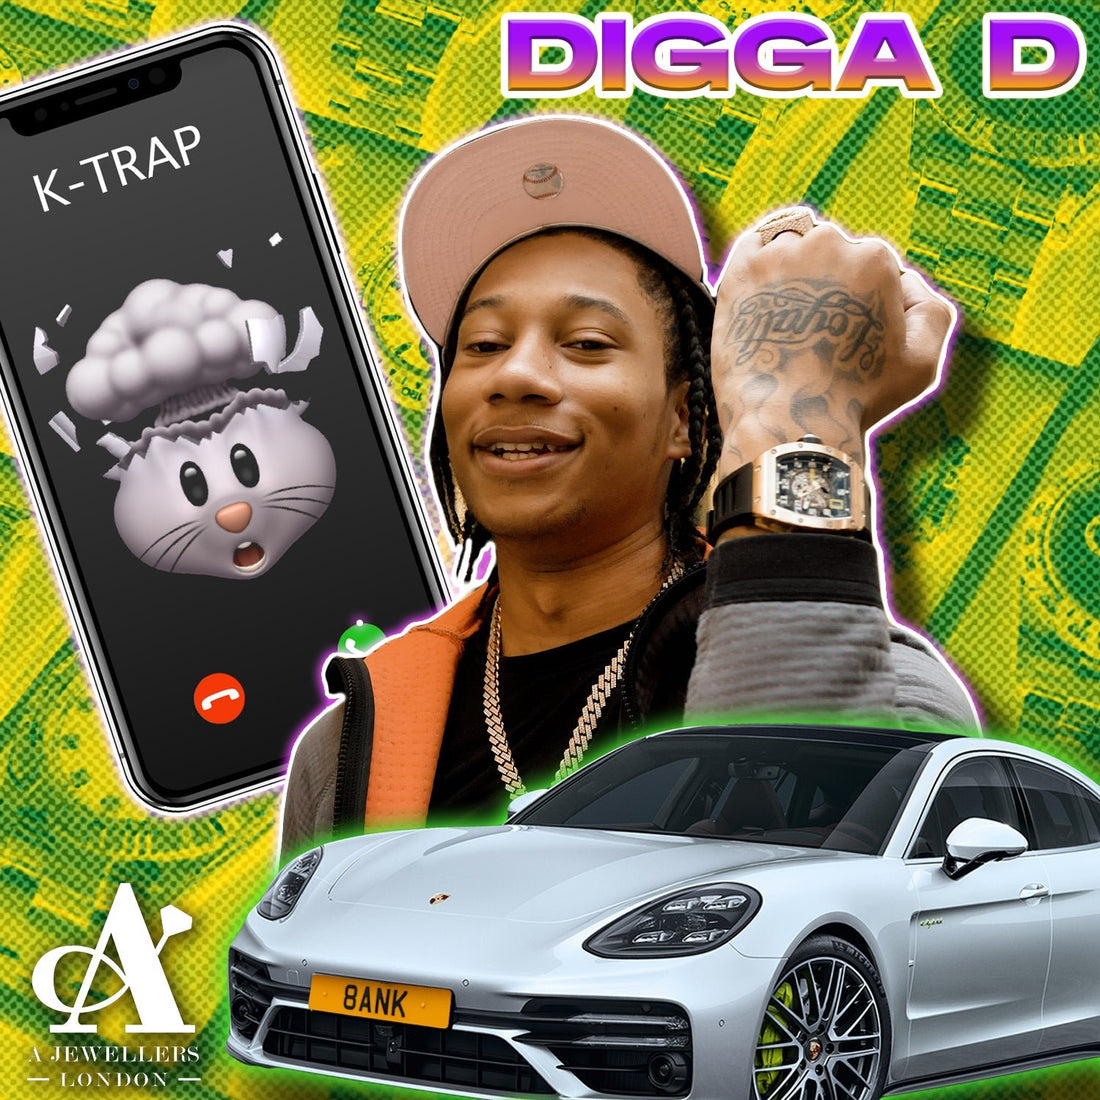 Digga D Spends £250K On A Watch! - A Jewellers